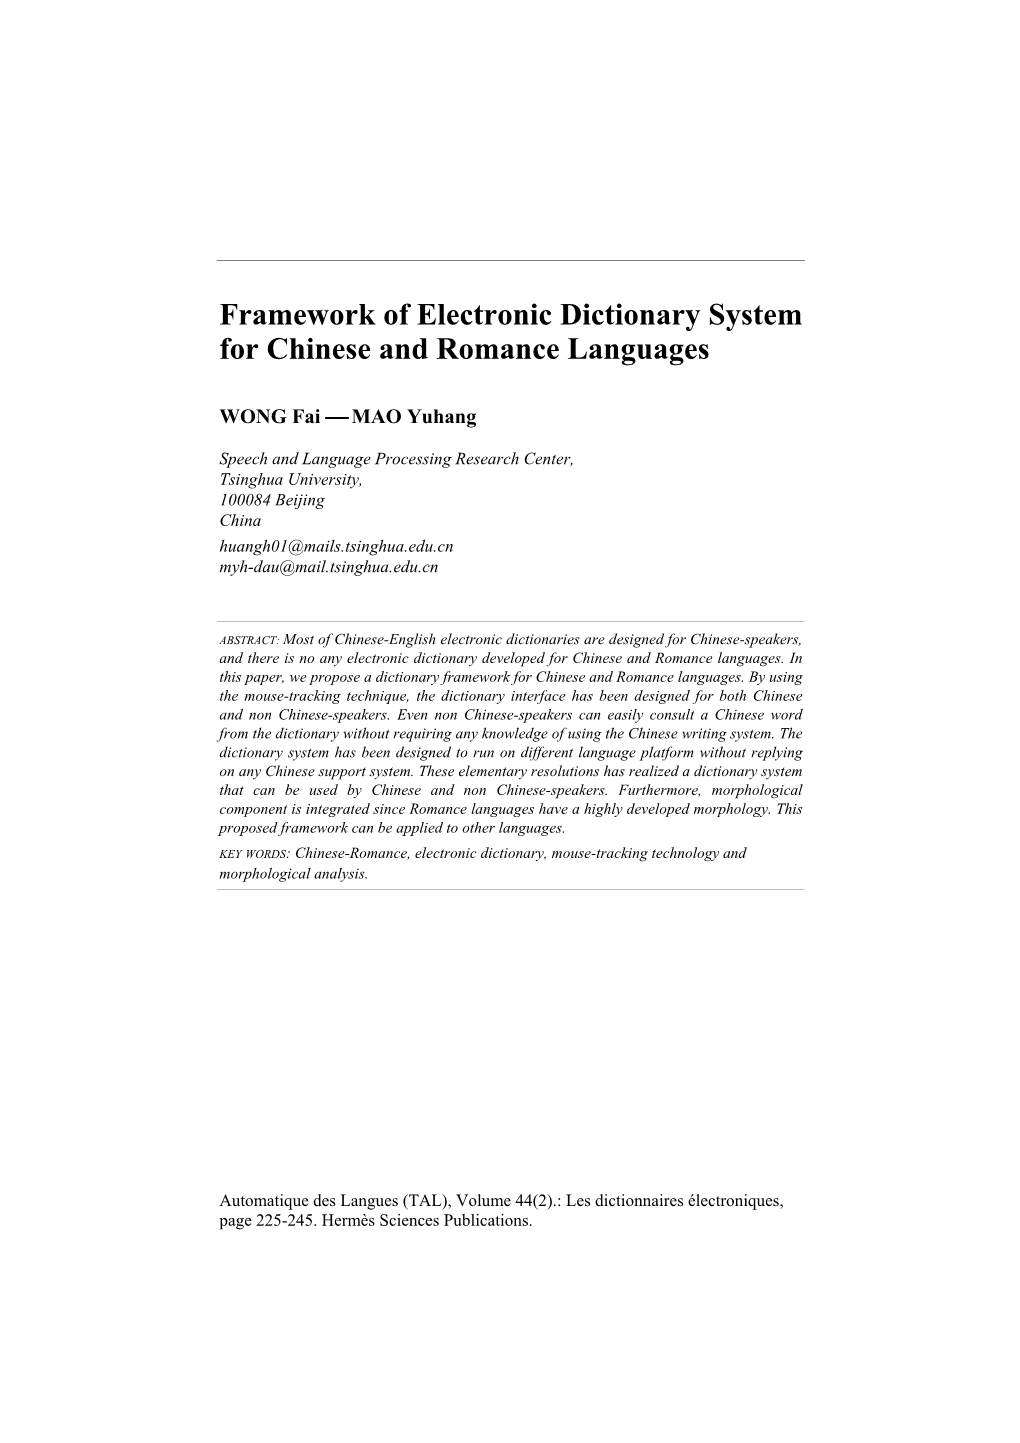 Framework of Electronic Dictionary System for Chinese and Romance Languages